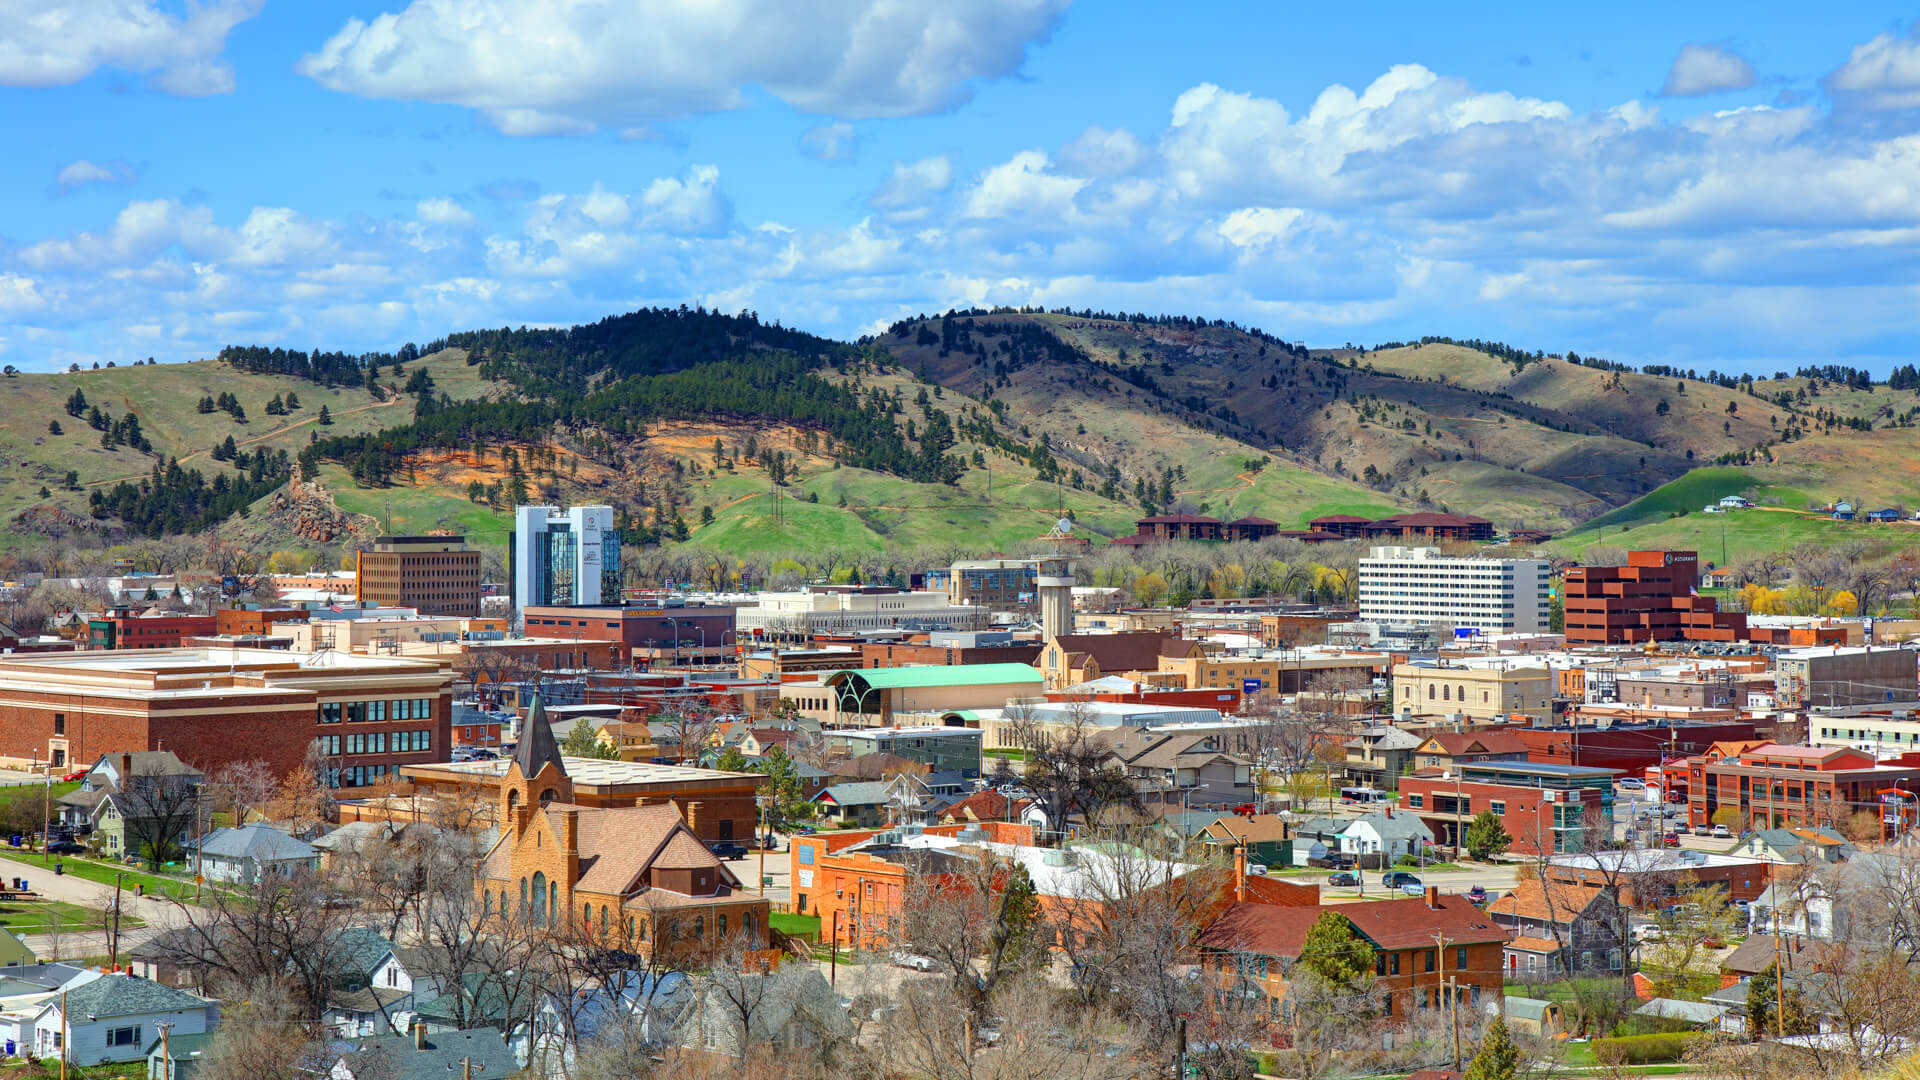 <p>In Rapid City, the unemployment rate increased by 0.5 percentage points between 2007 and 2009, but it has since declined. However, the city’s labor force participation rate also decreased by 2.9 percentage points between 2007 and 2017, going from 68.6% to 65.7%.</p>